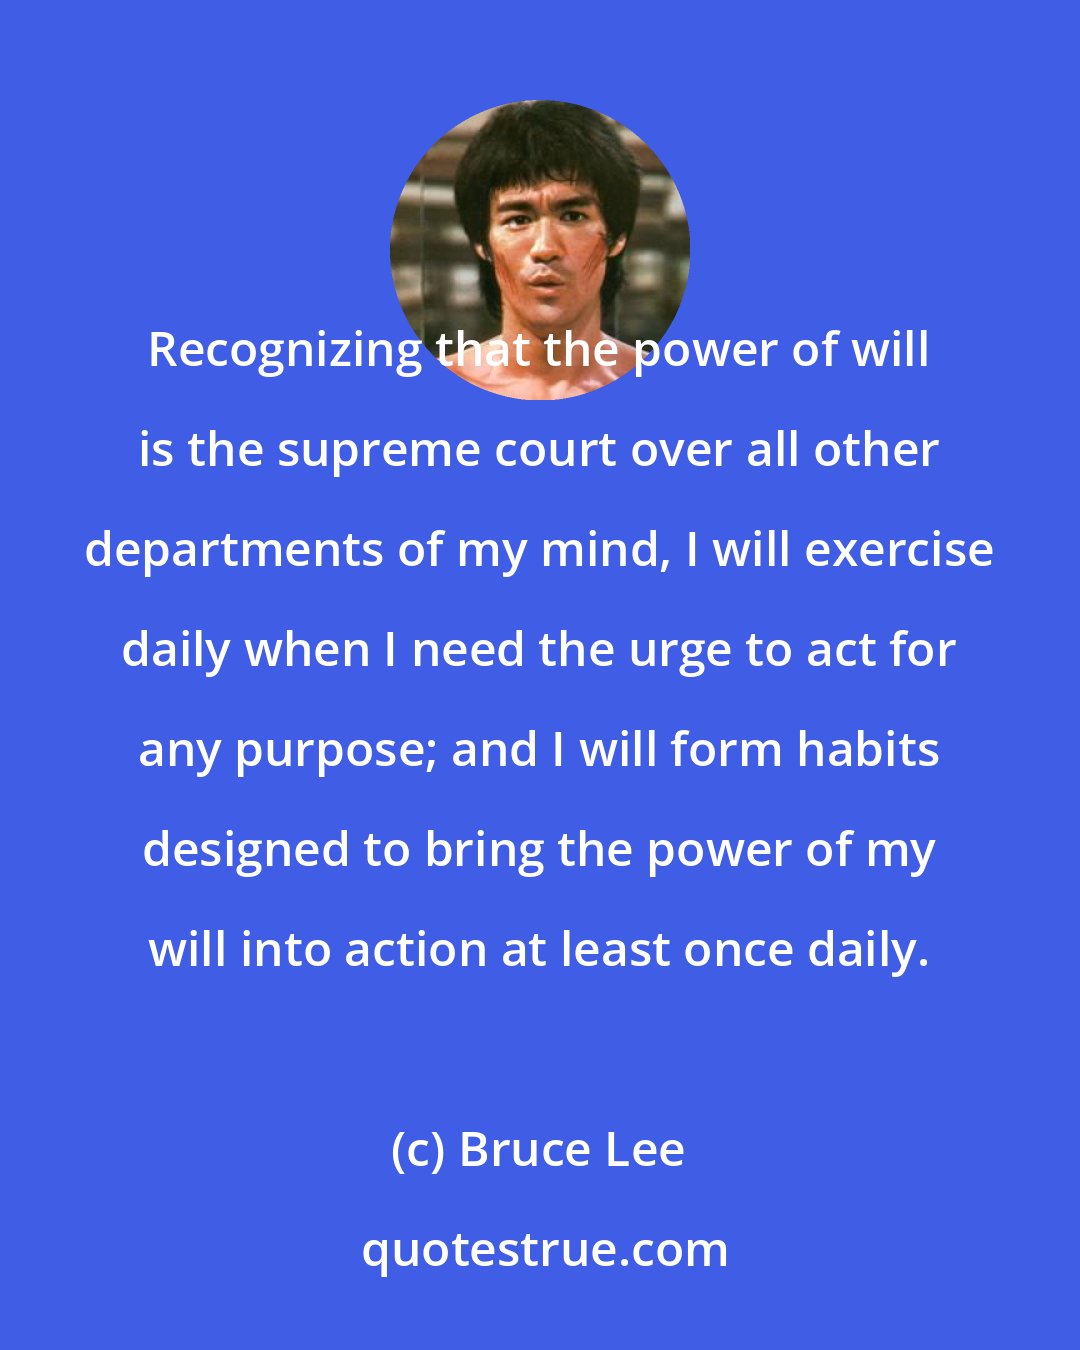 Bruce Lee: Recognizing that the power of will is the supreme court over all other departments of my mind, I will exercise daily when I need the urge to act for any purpose; and I will form habits designed to bring the power of my will into action at least once daily.